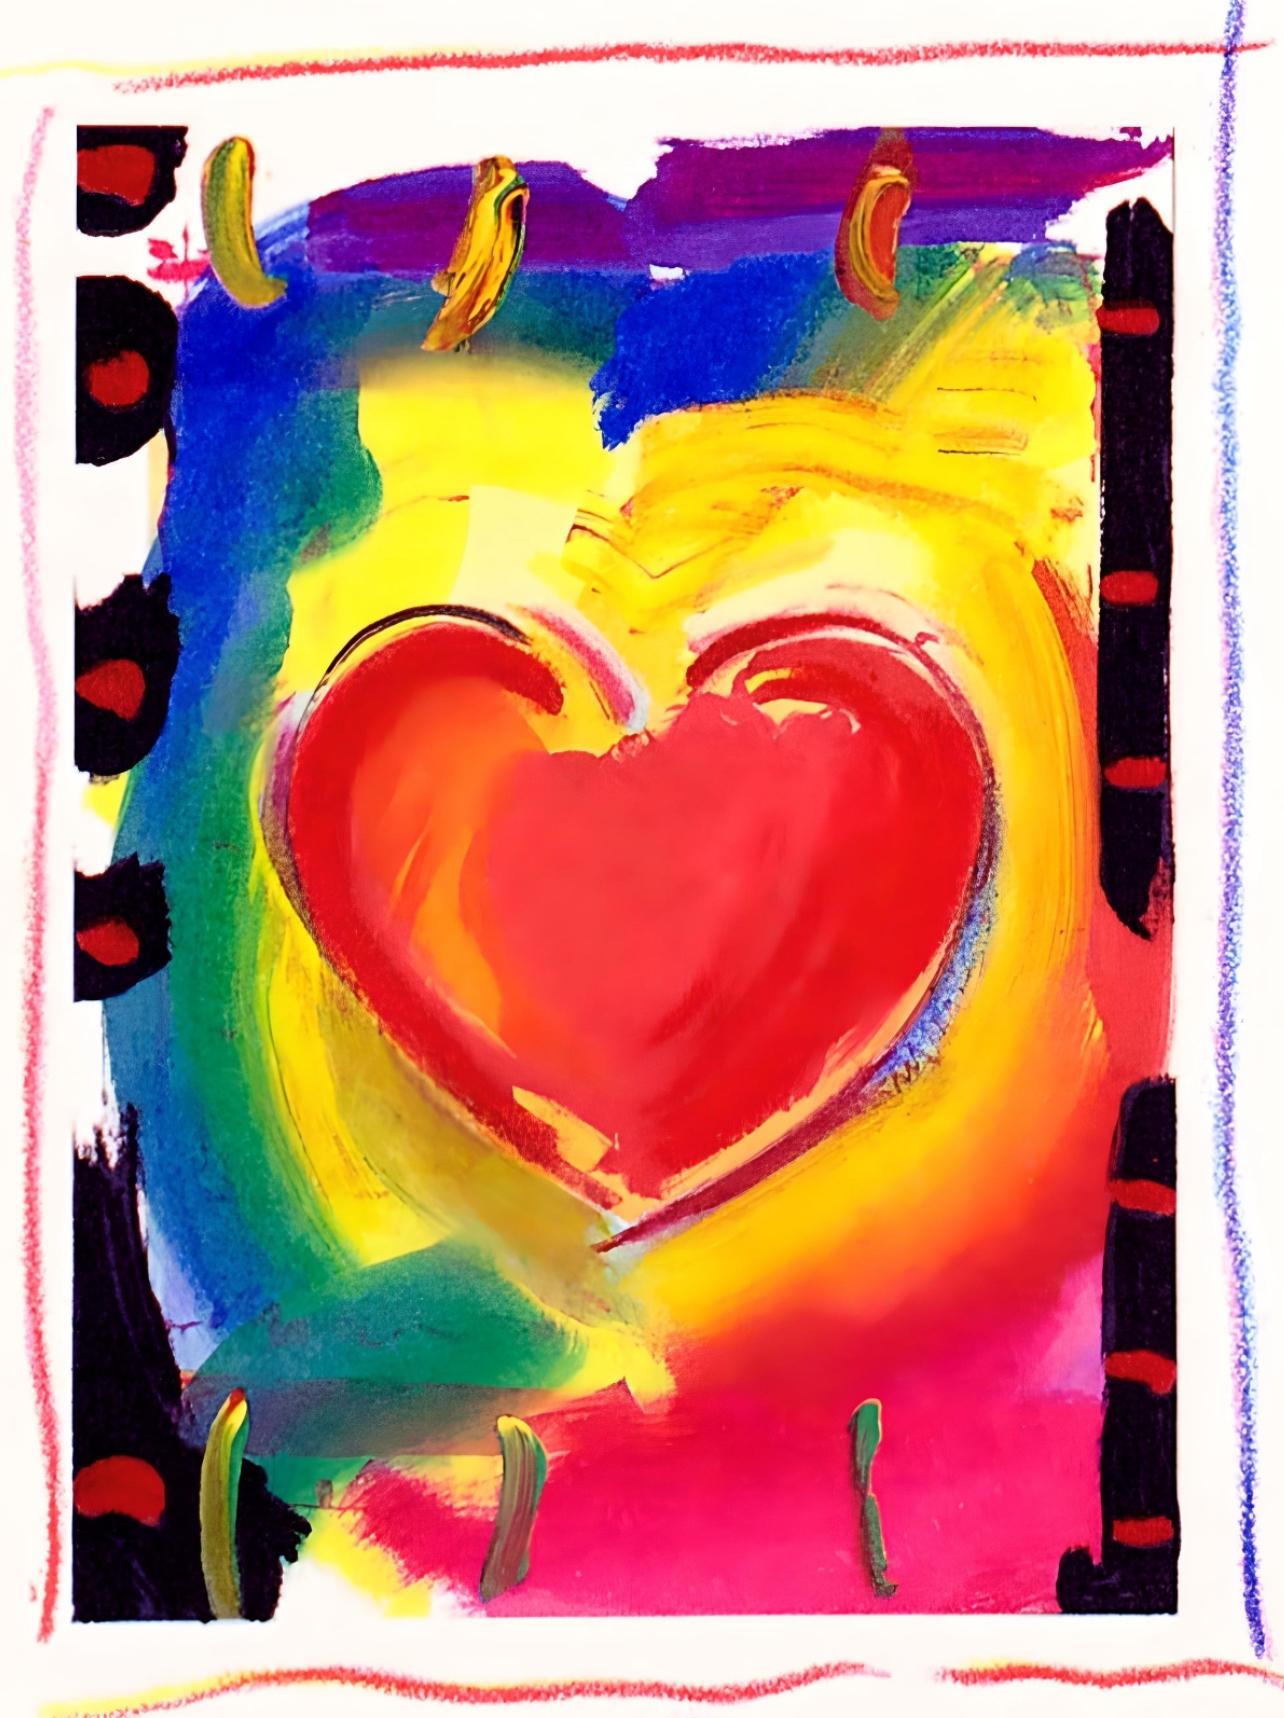 Artist: Peter Max (1937)
Title: Heart Series I
Year: 1998
Edition: 130/300, plus proofs
Medium: Lithograph on Coventry Smooth paper
Size: 5 x 4 inches
Condition: Excellent
Inscription: Signed and numbered by the artist.
Notes: Published by Via